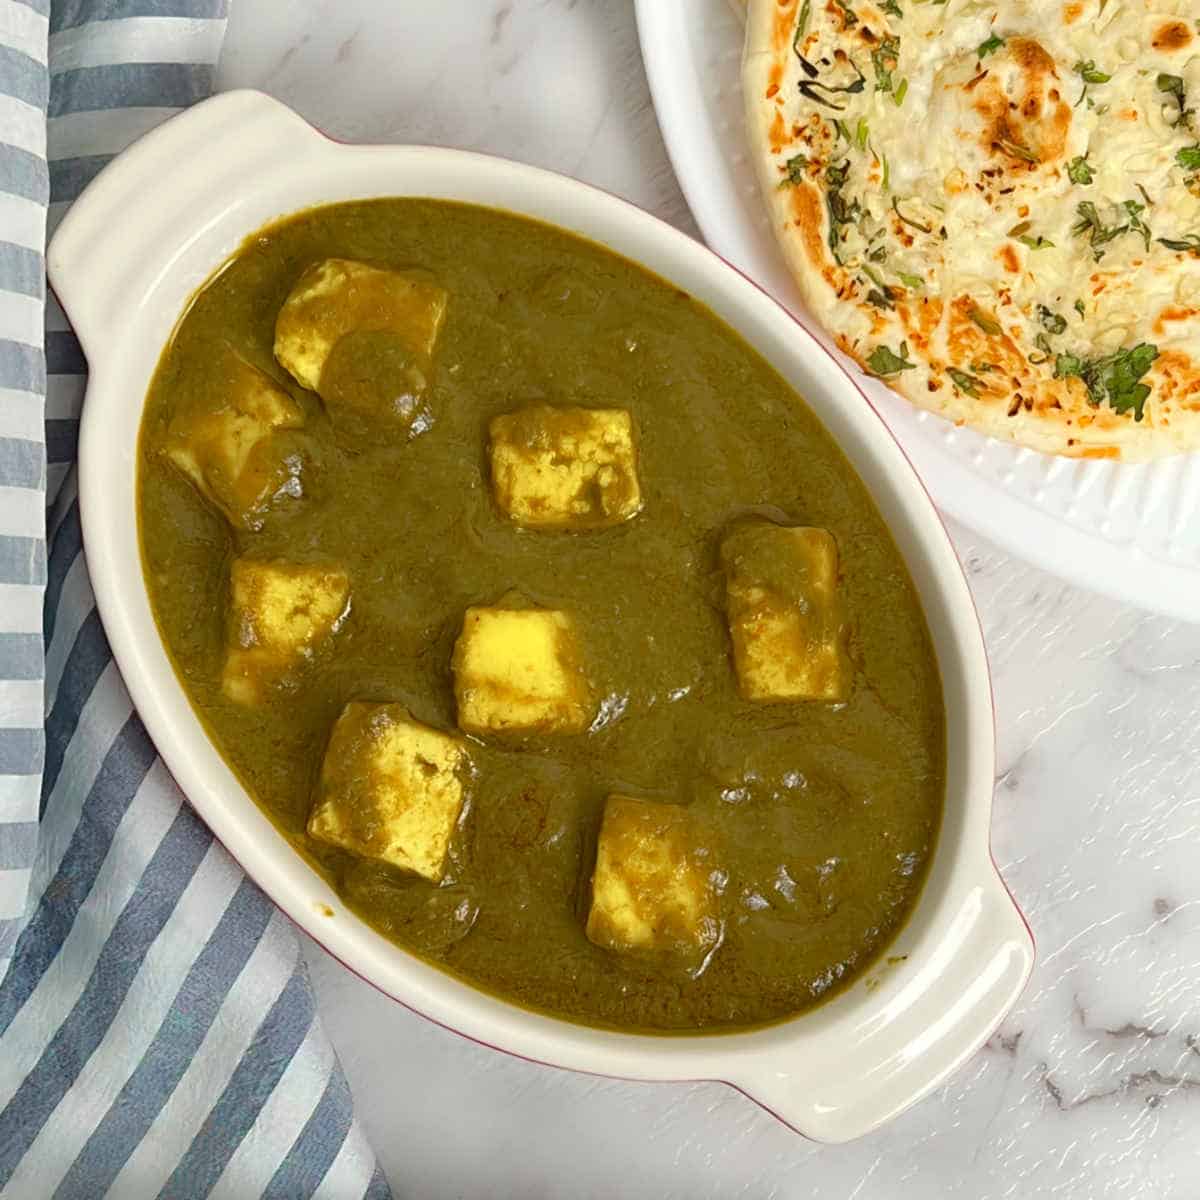 palak paneer served with naan.